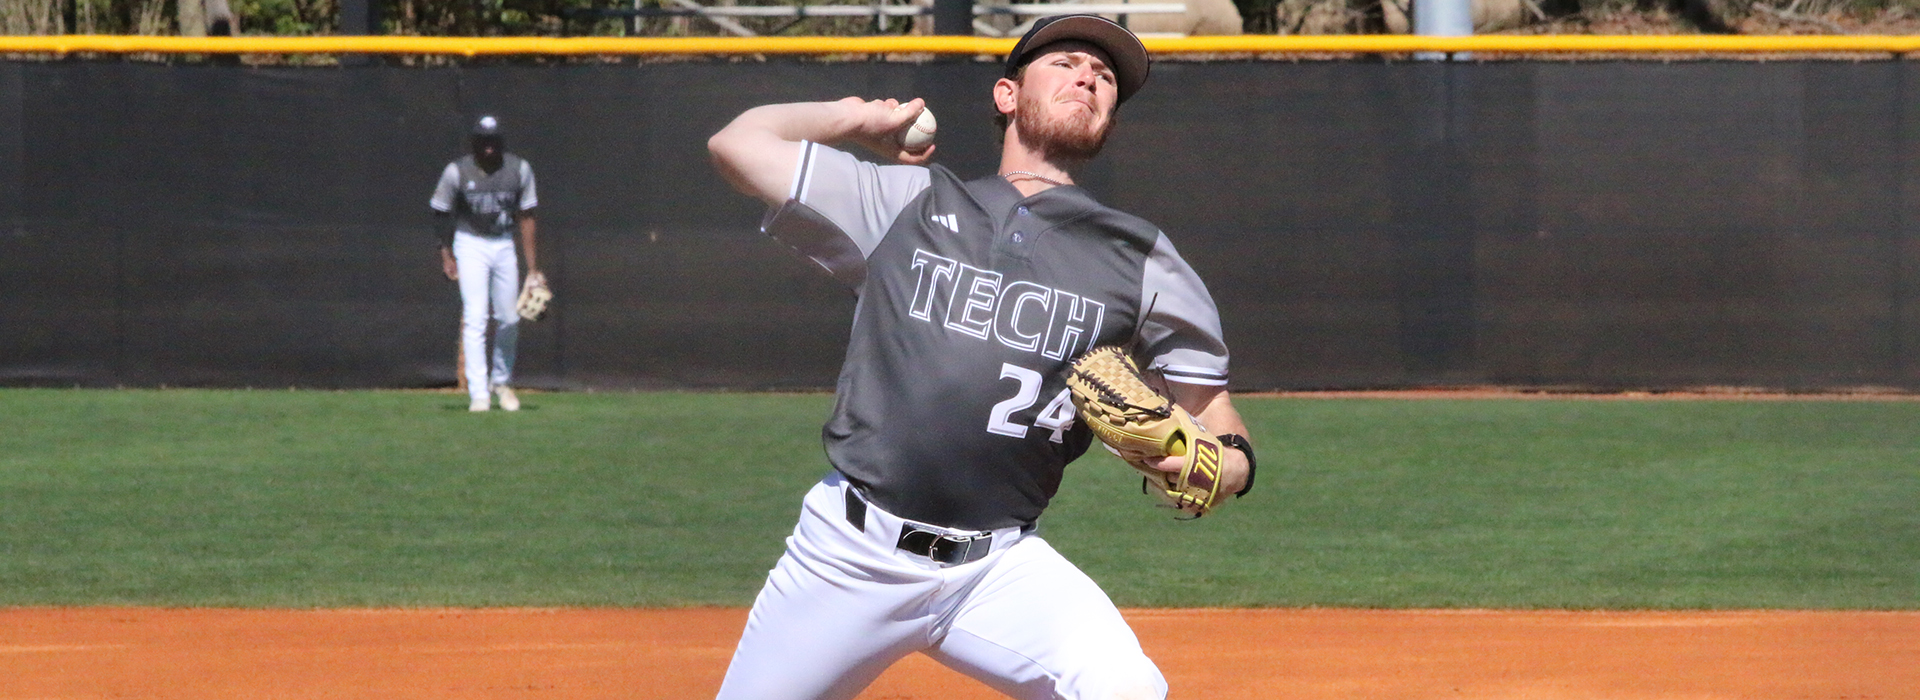 Strong offense, great pitching help Tech clinch series over Queens with 13-2 win